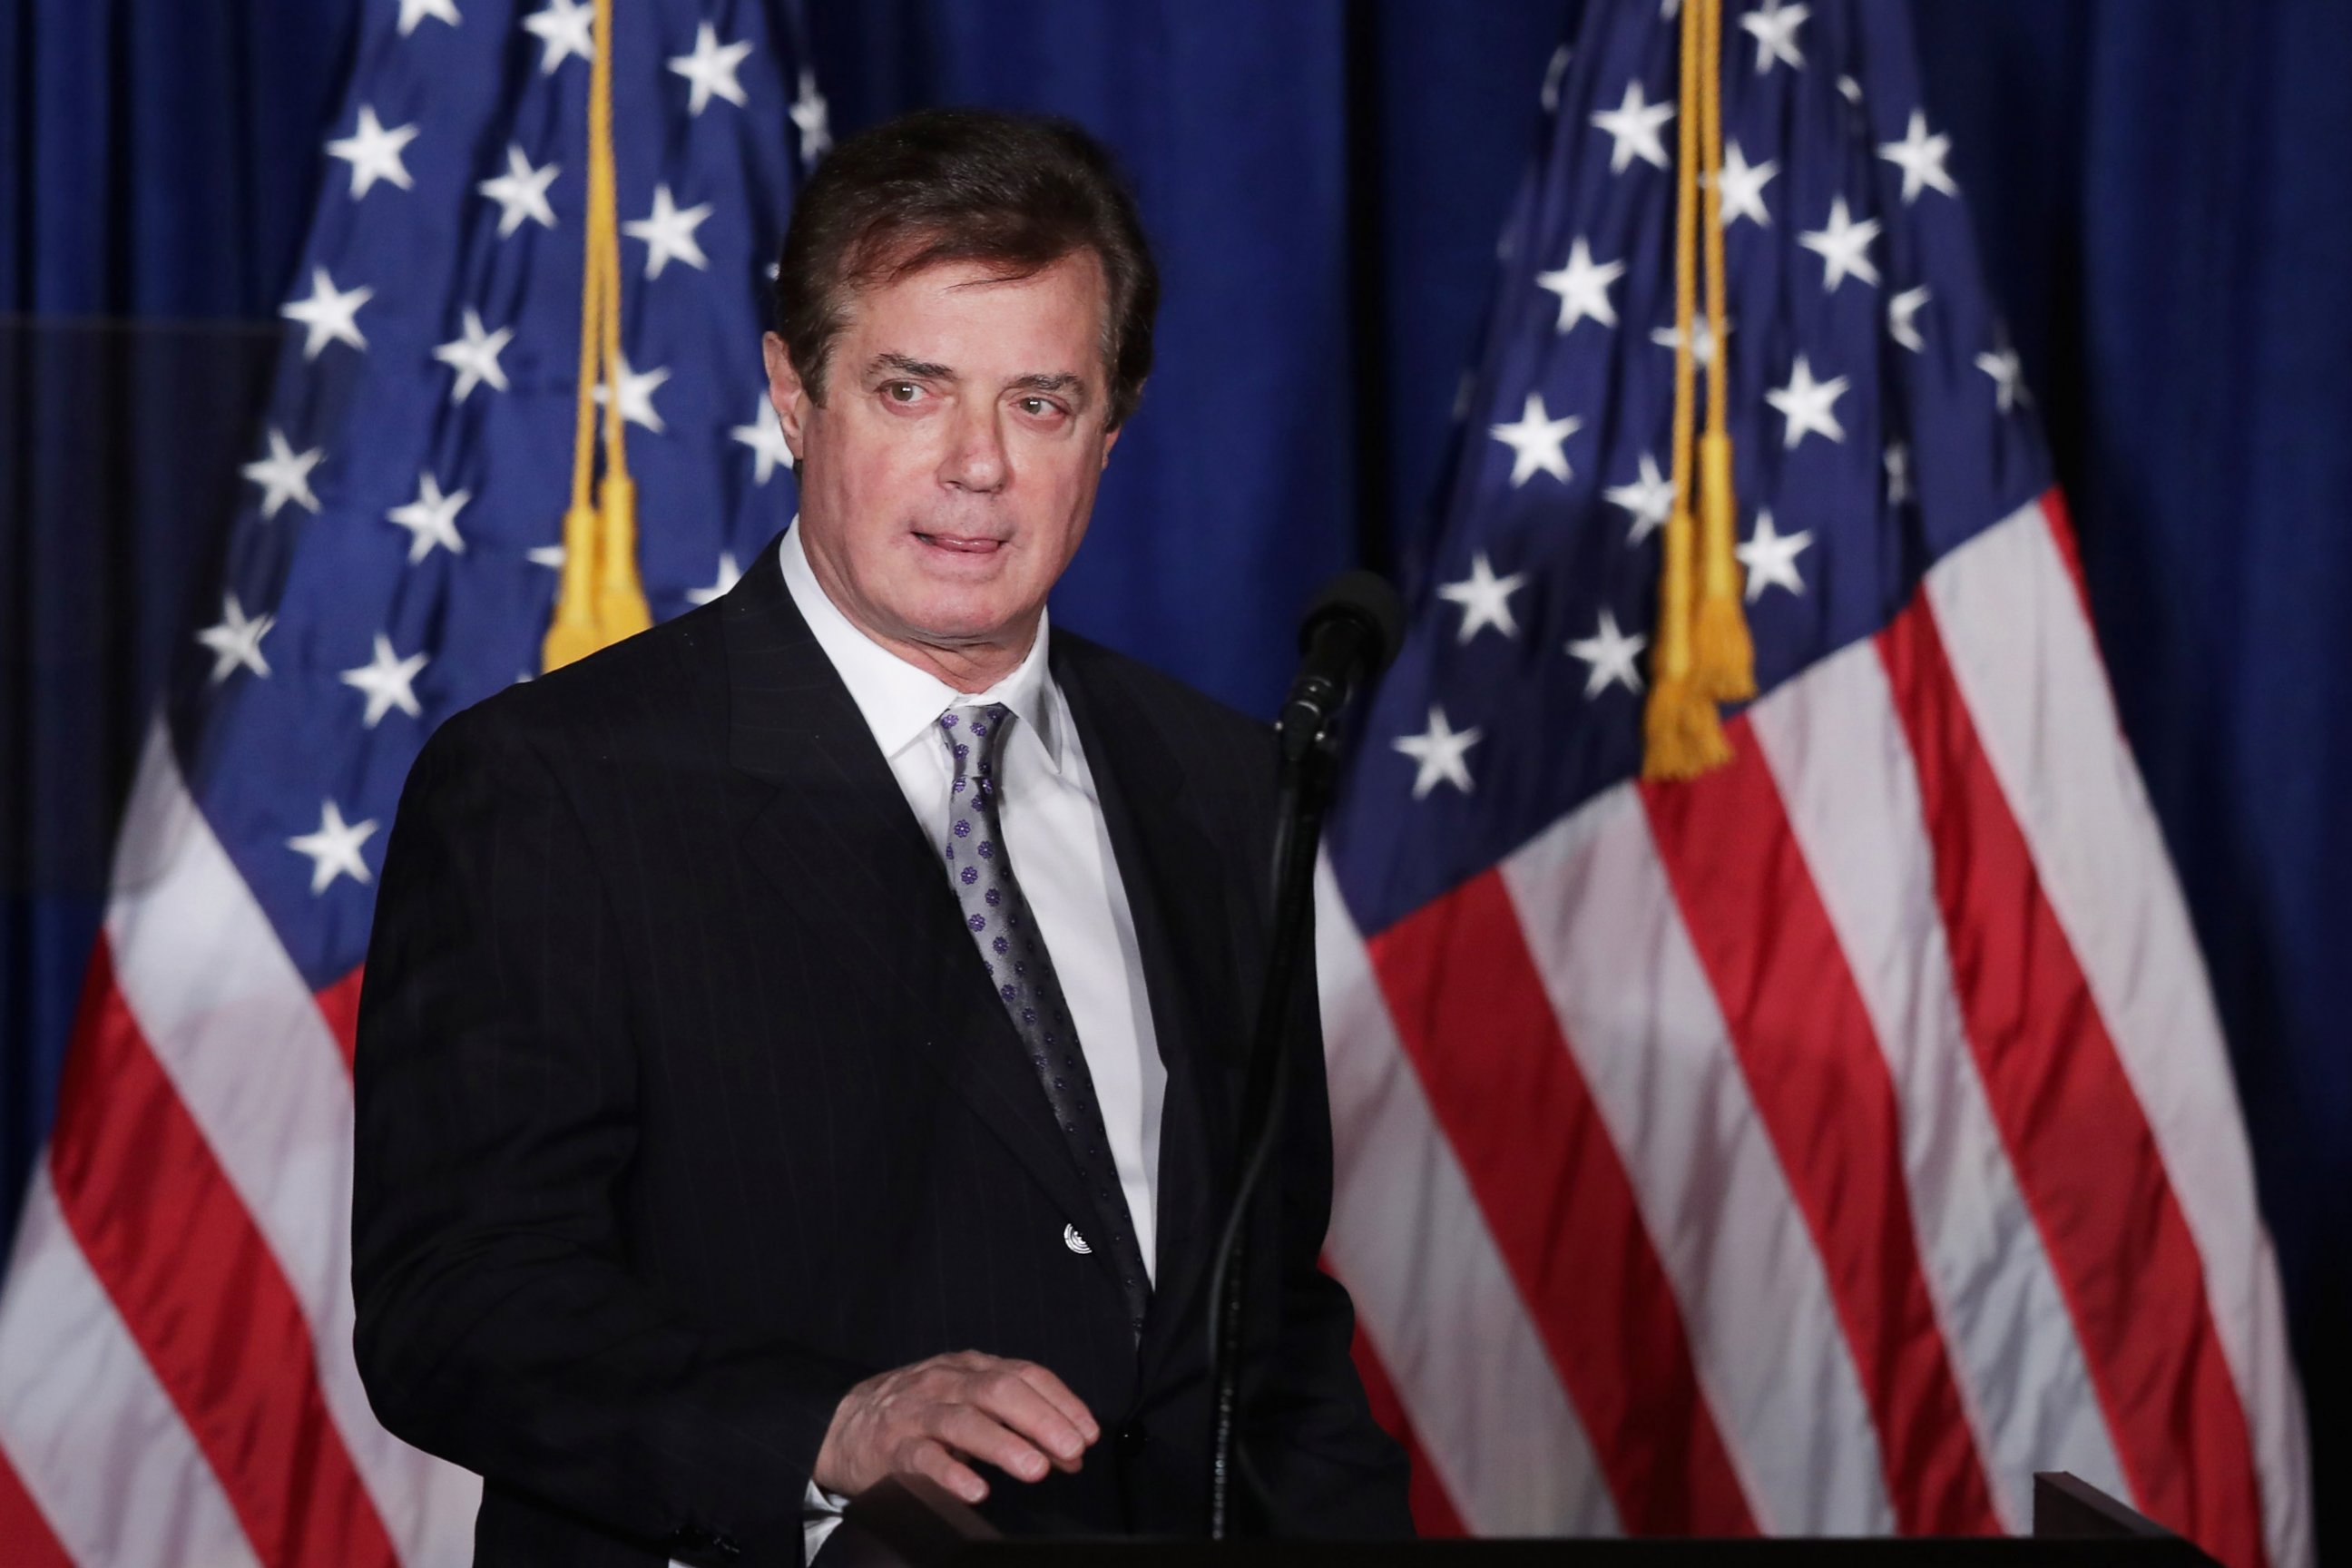 PHOTO: Paul Manafort checks the teleprompters before Trump's speech at the Mayflower Hotel, April 27, 2016 in Washington.